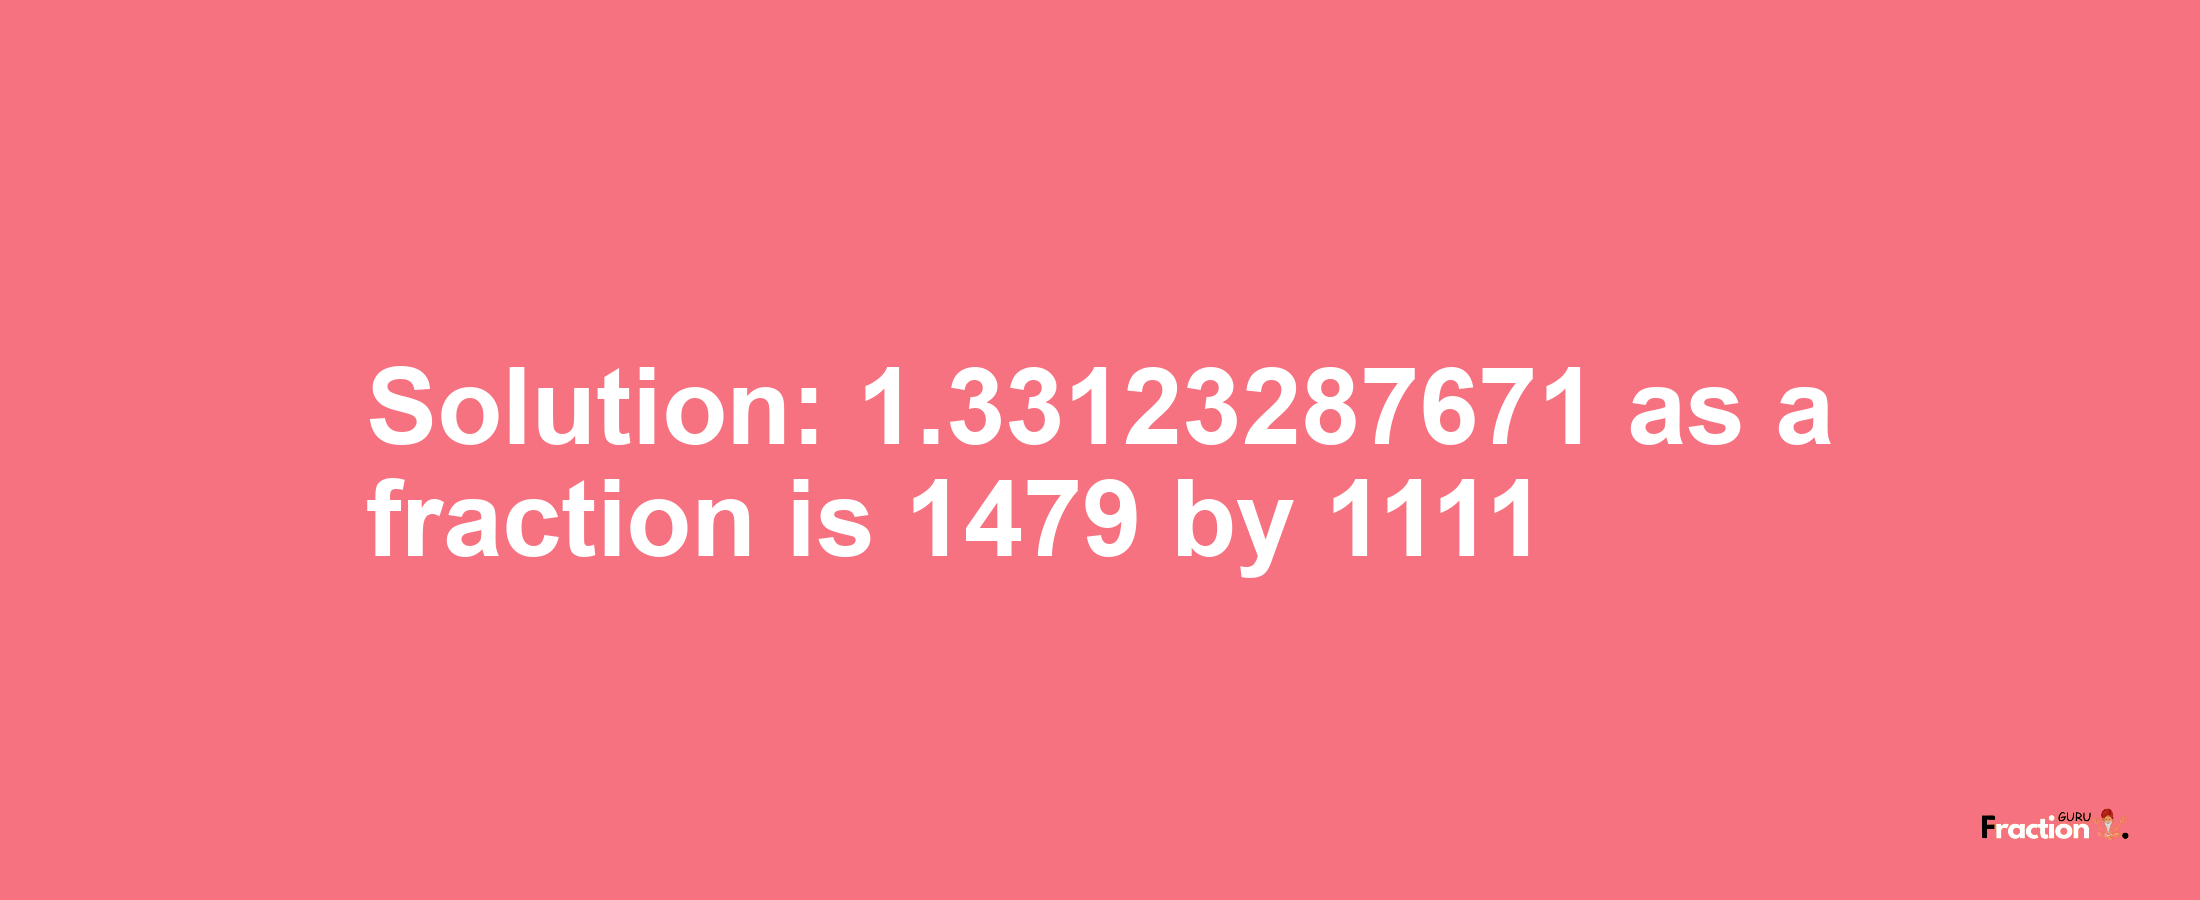 Solution:1.33123287671 as a fraction is 1479/1111